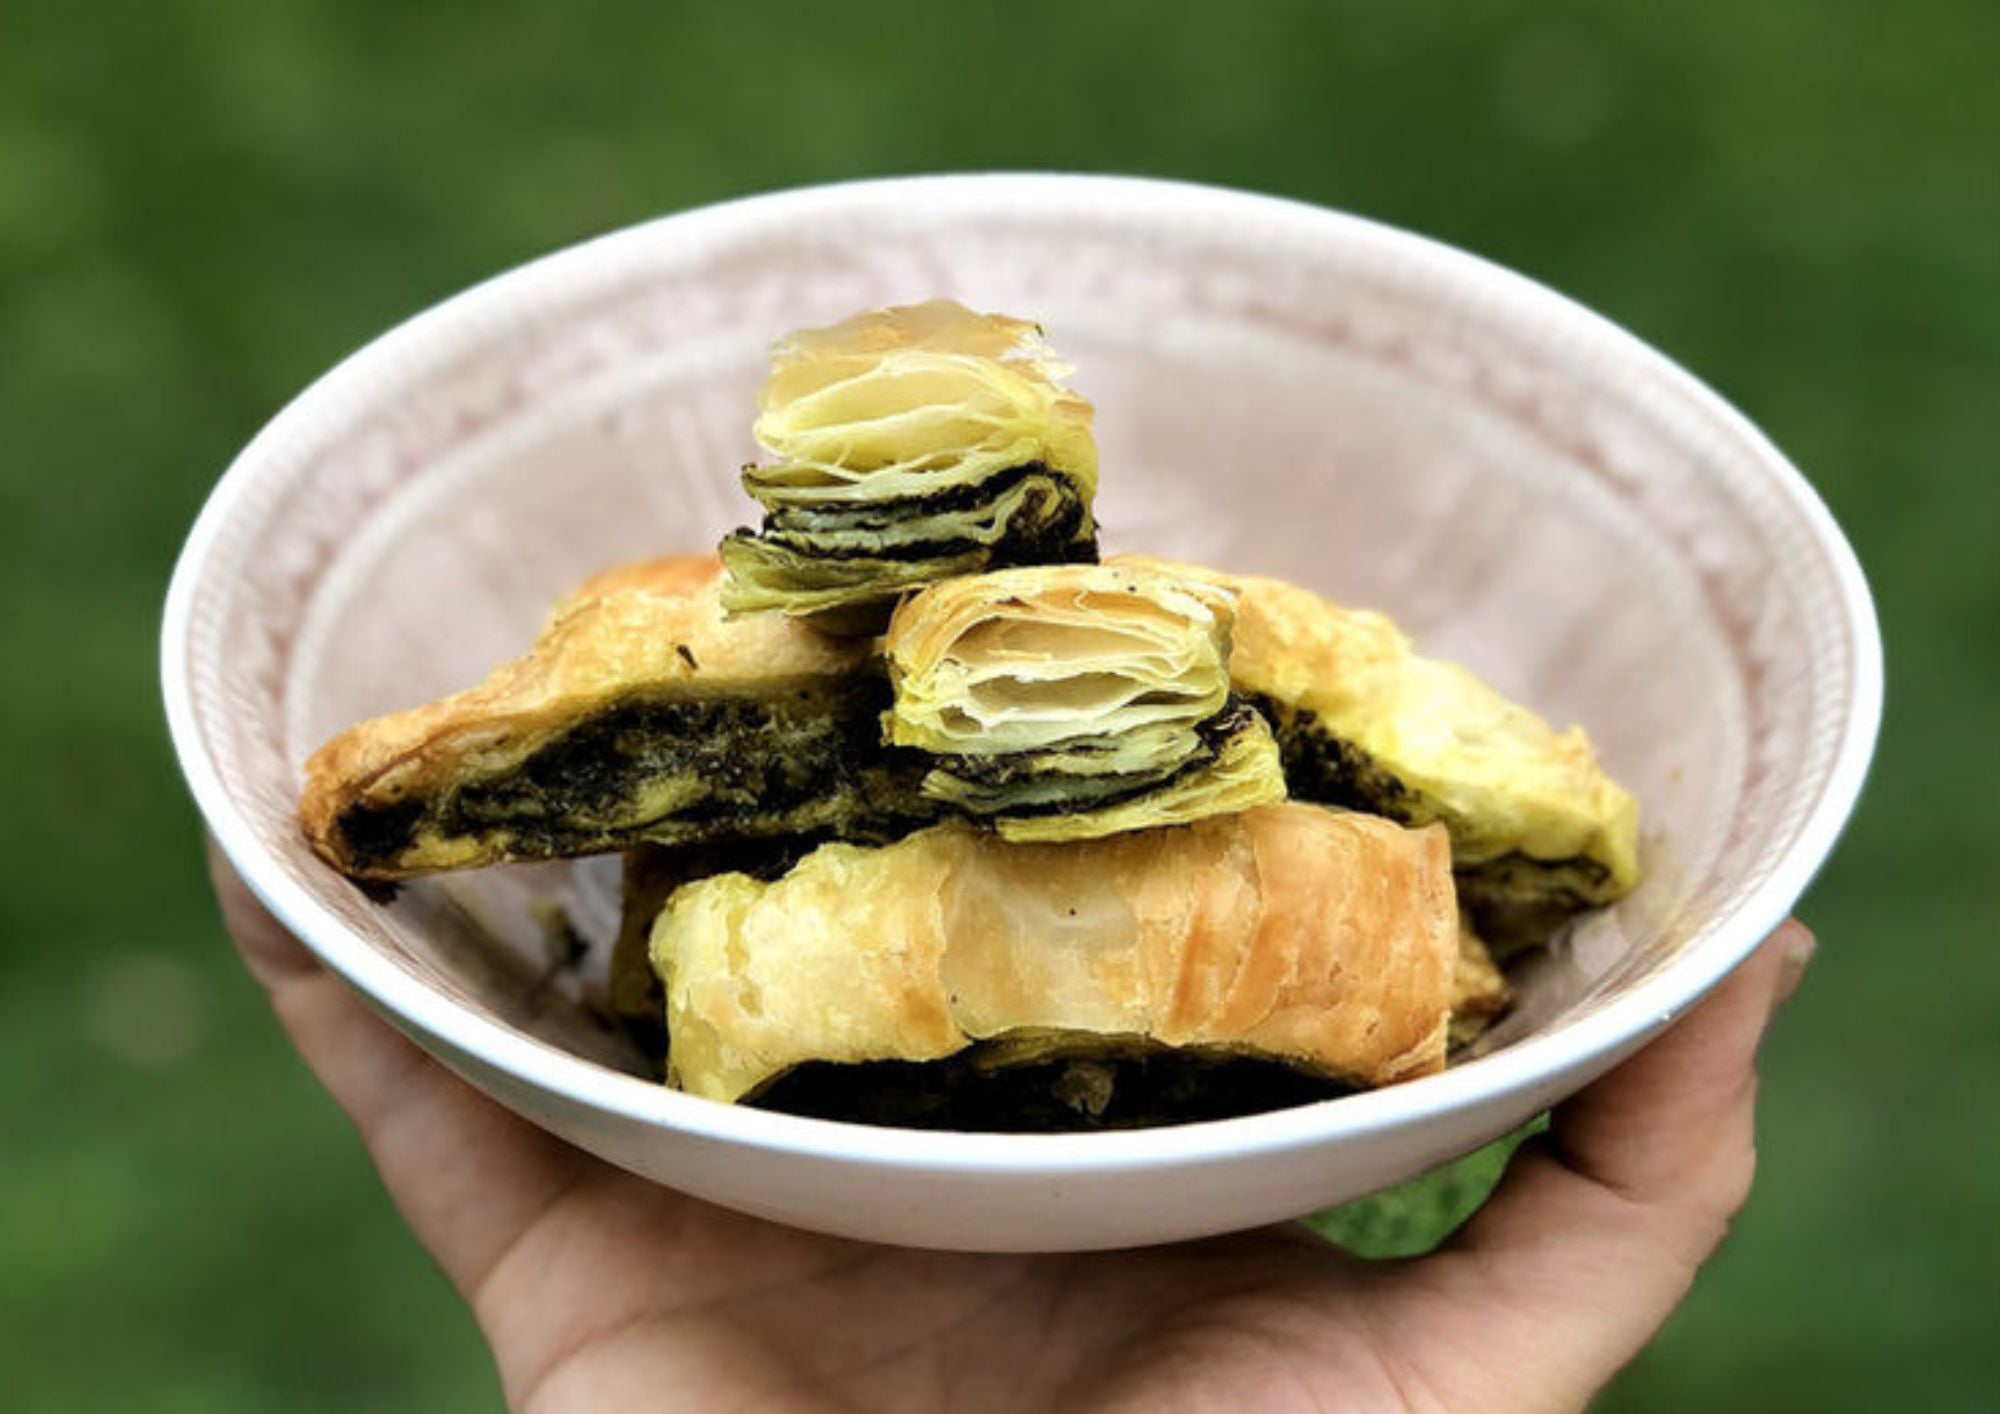 Blog posts How To Make Feta & Herbs Puff Pastry Party Snacks